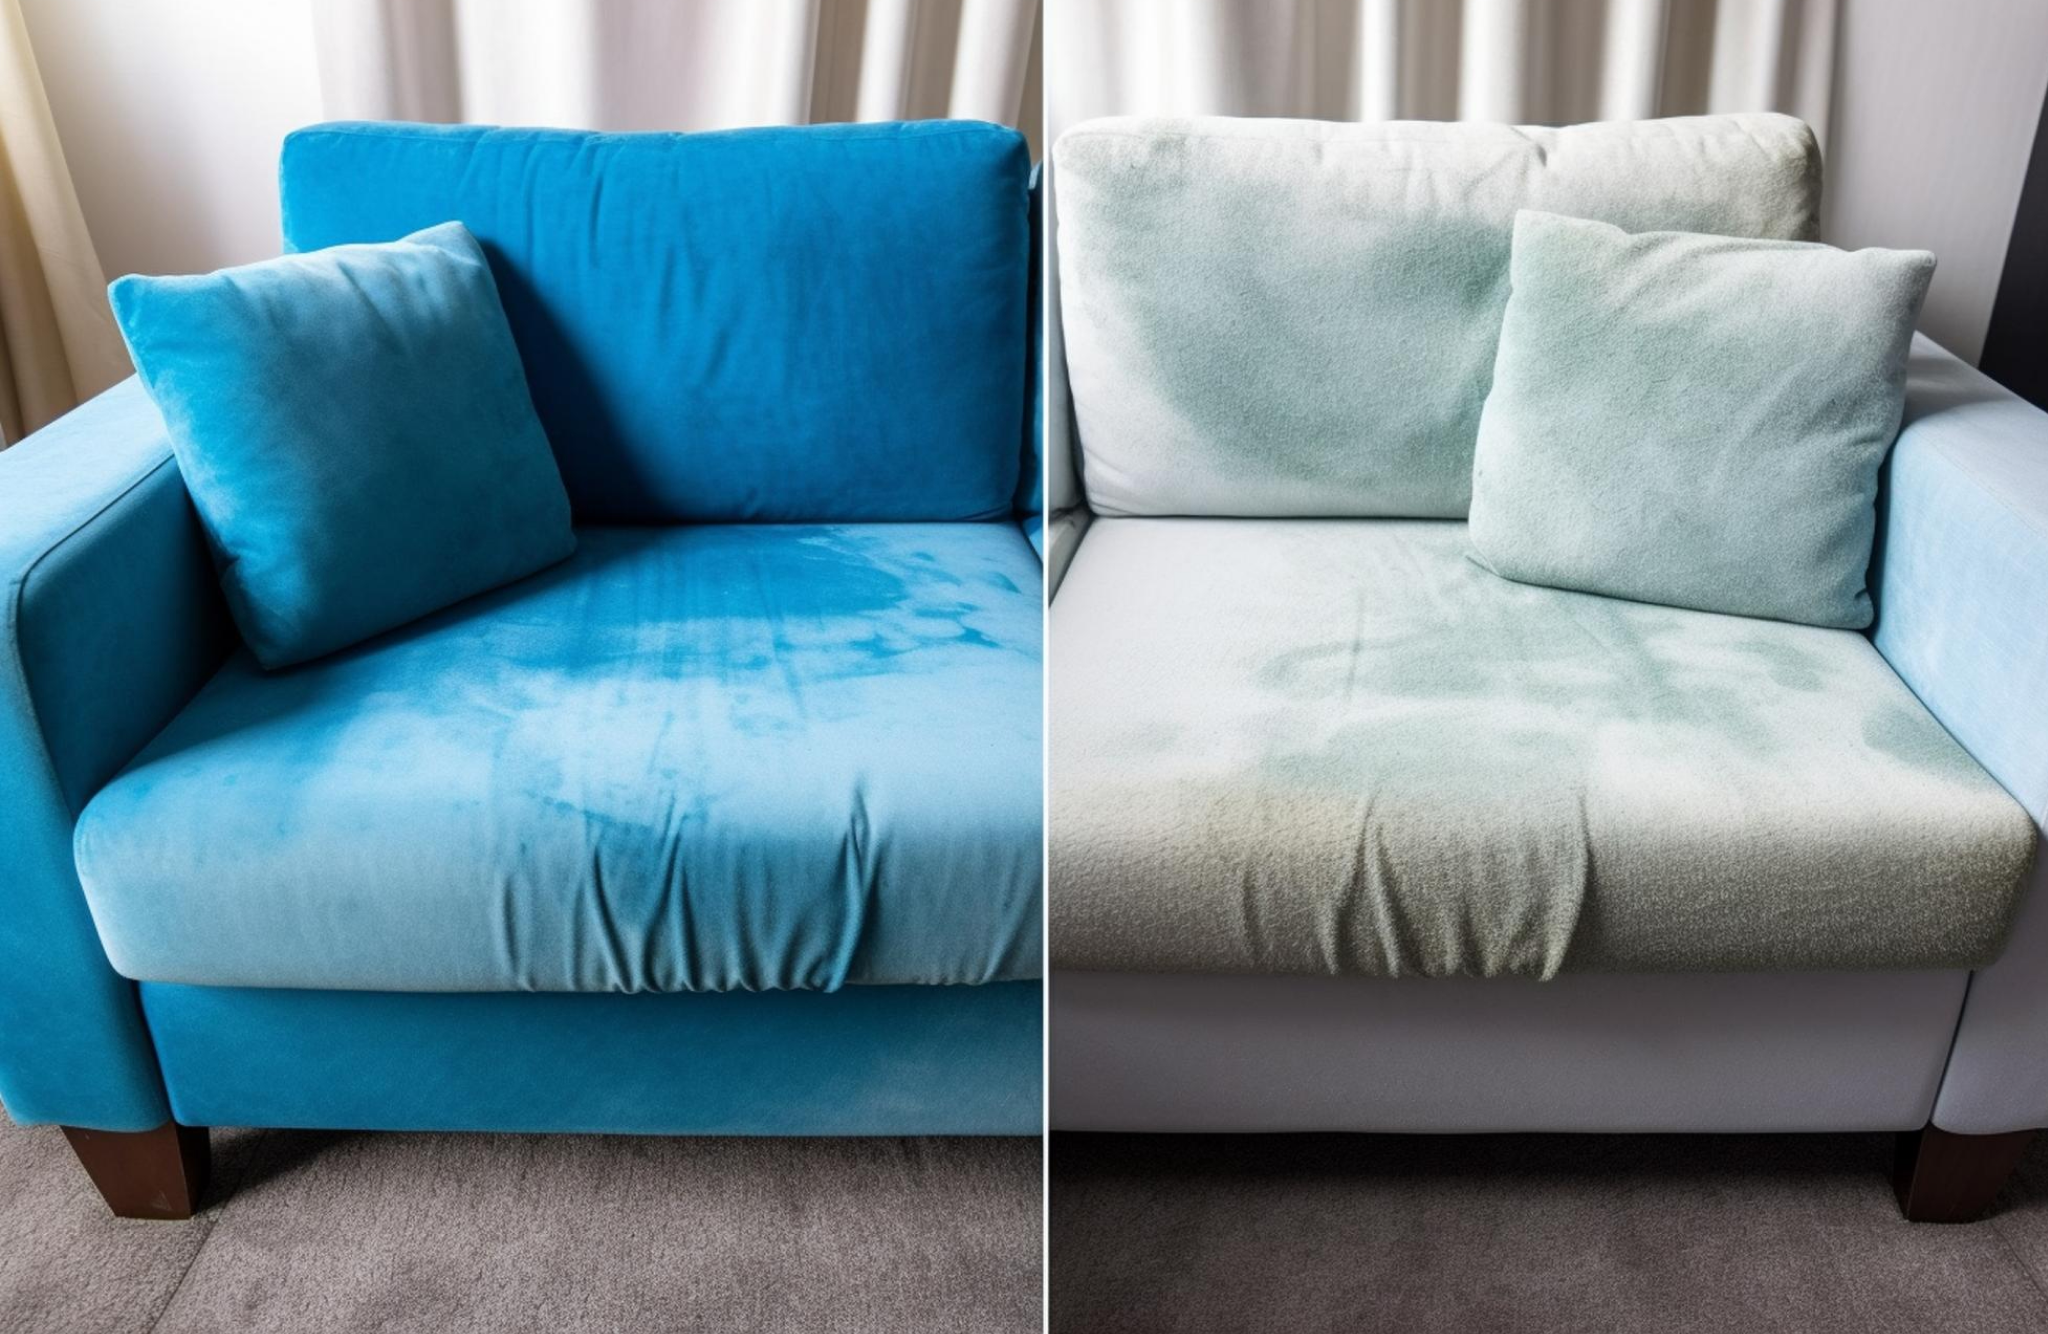 Sofa before and after drycleaning